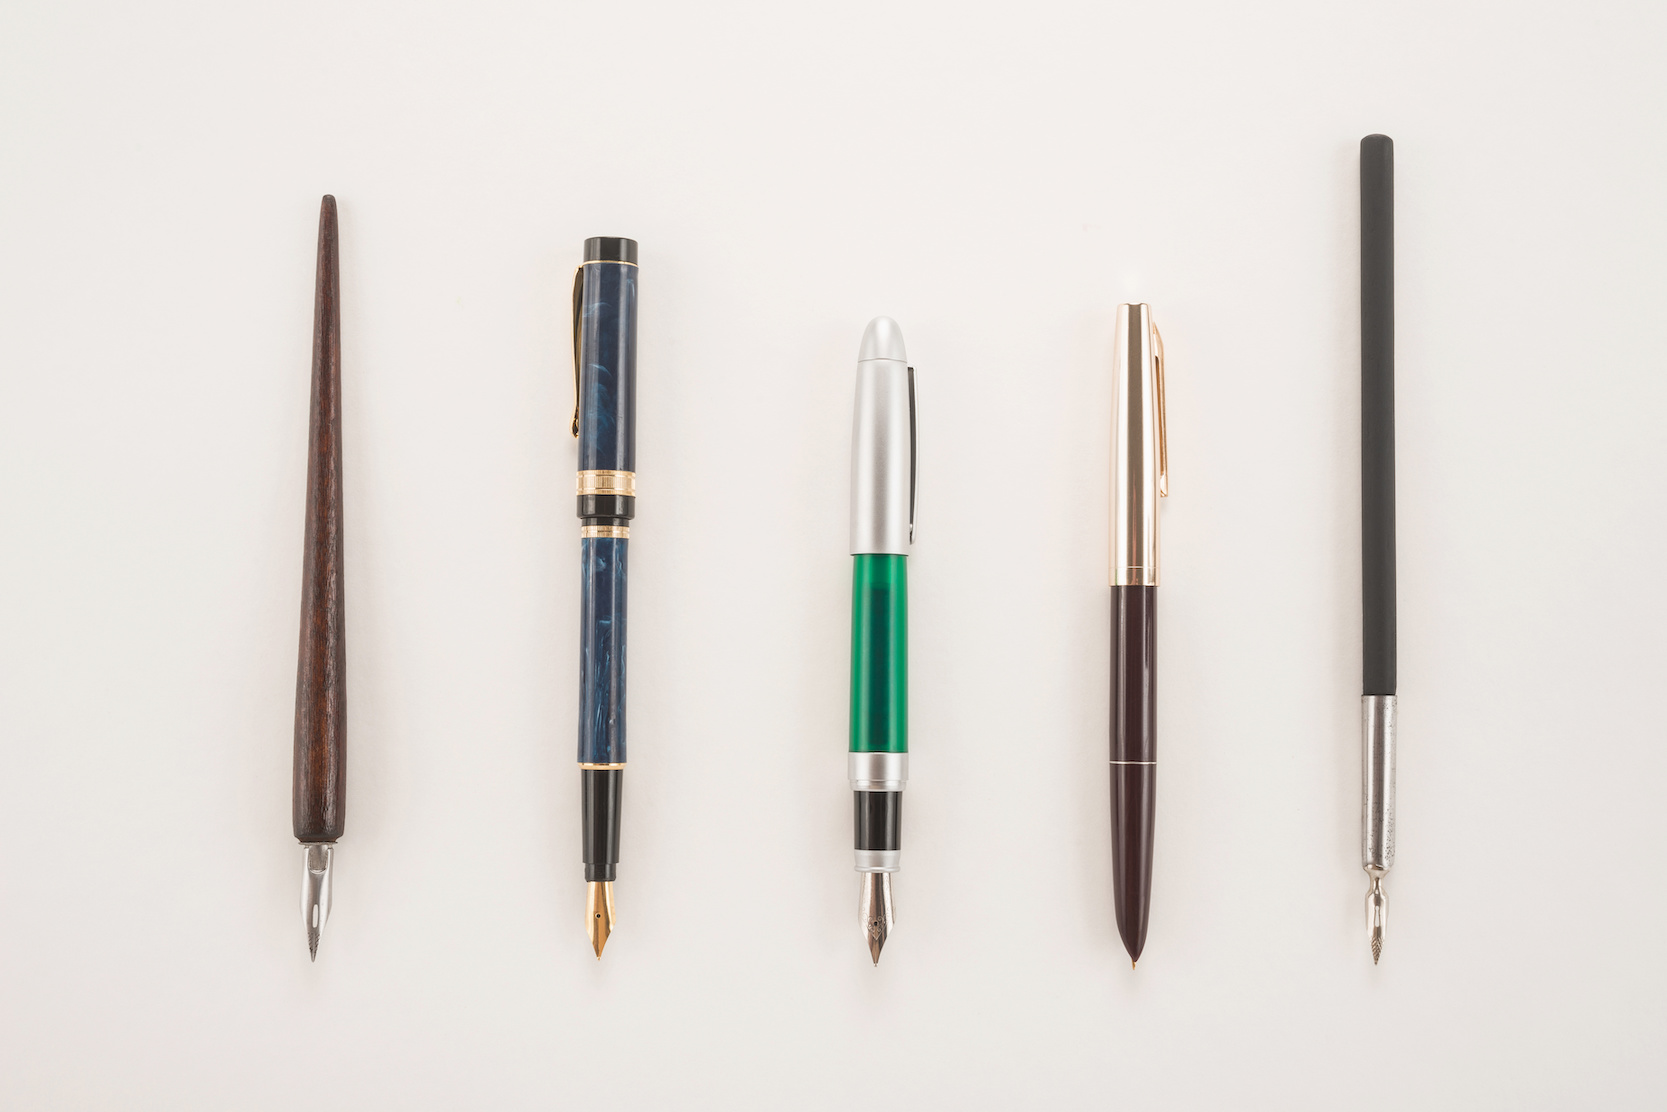 A series of pens